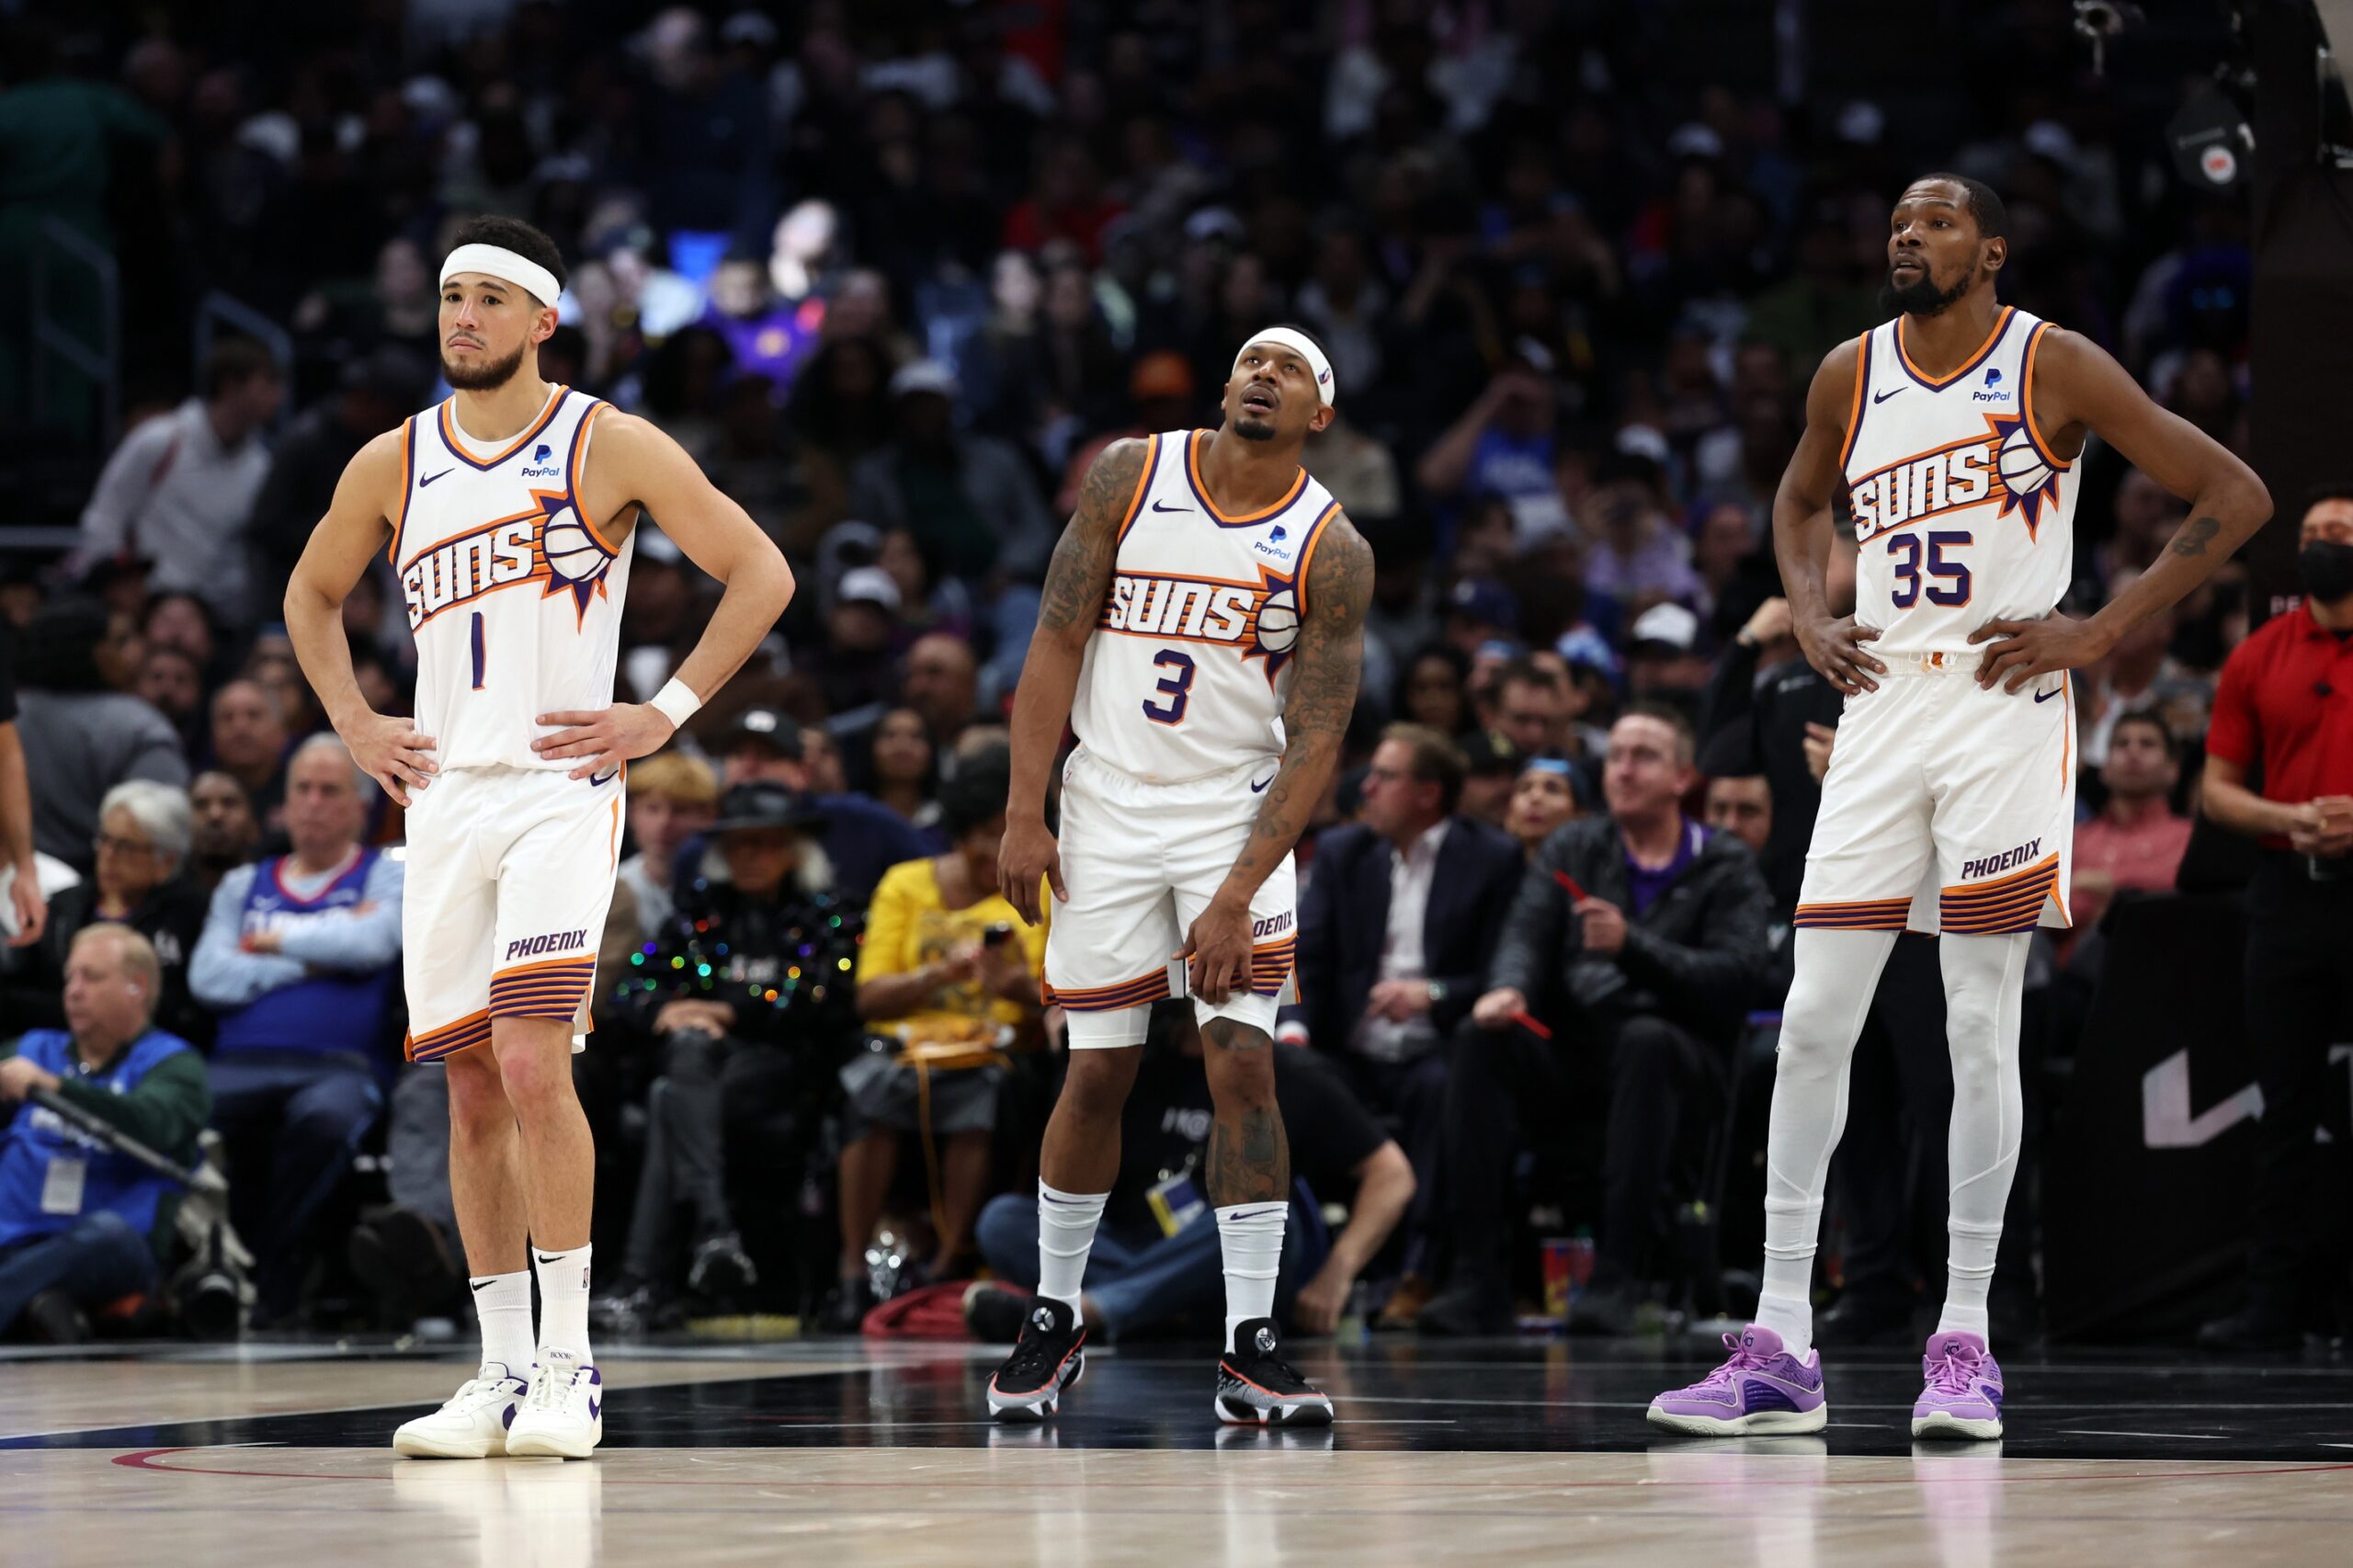 The Suns had a disappointing playoff exit and have drawn comparisons to other teams.